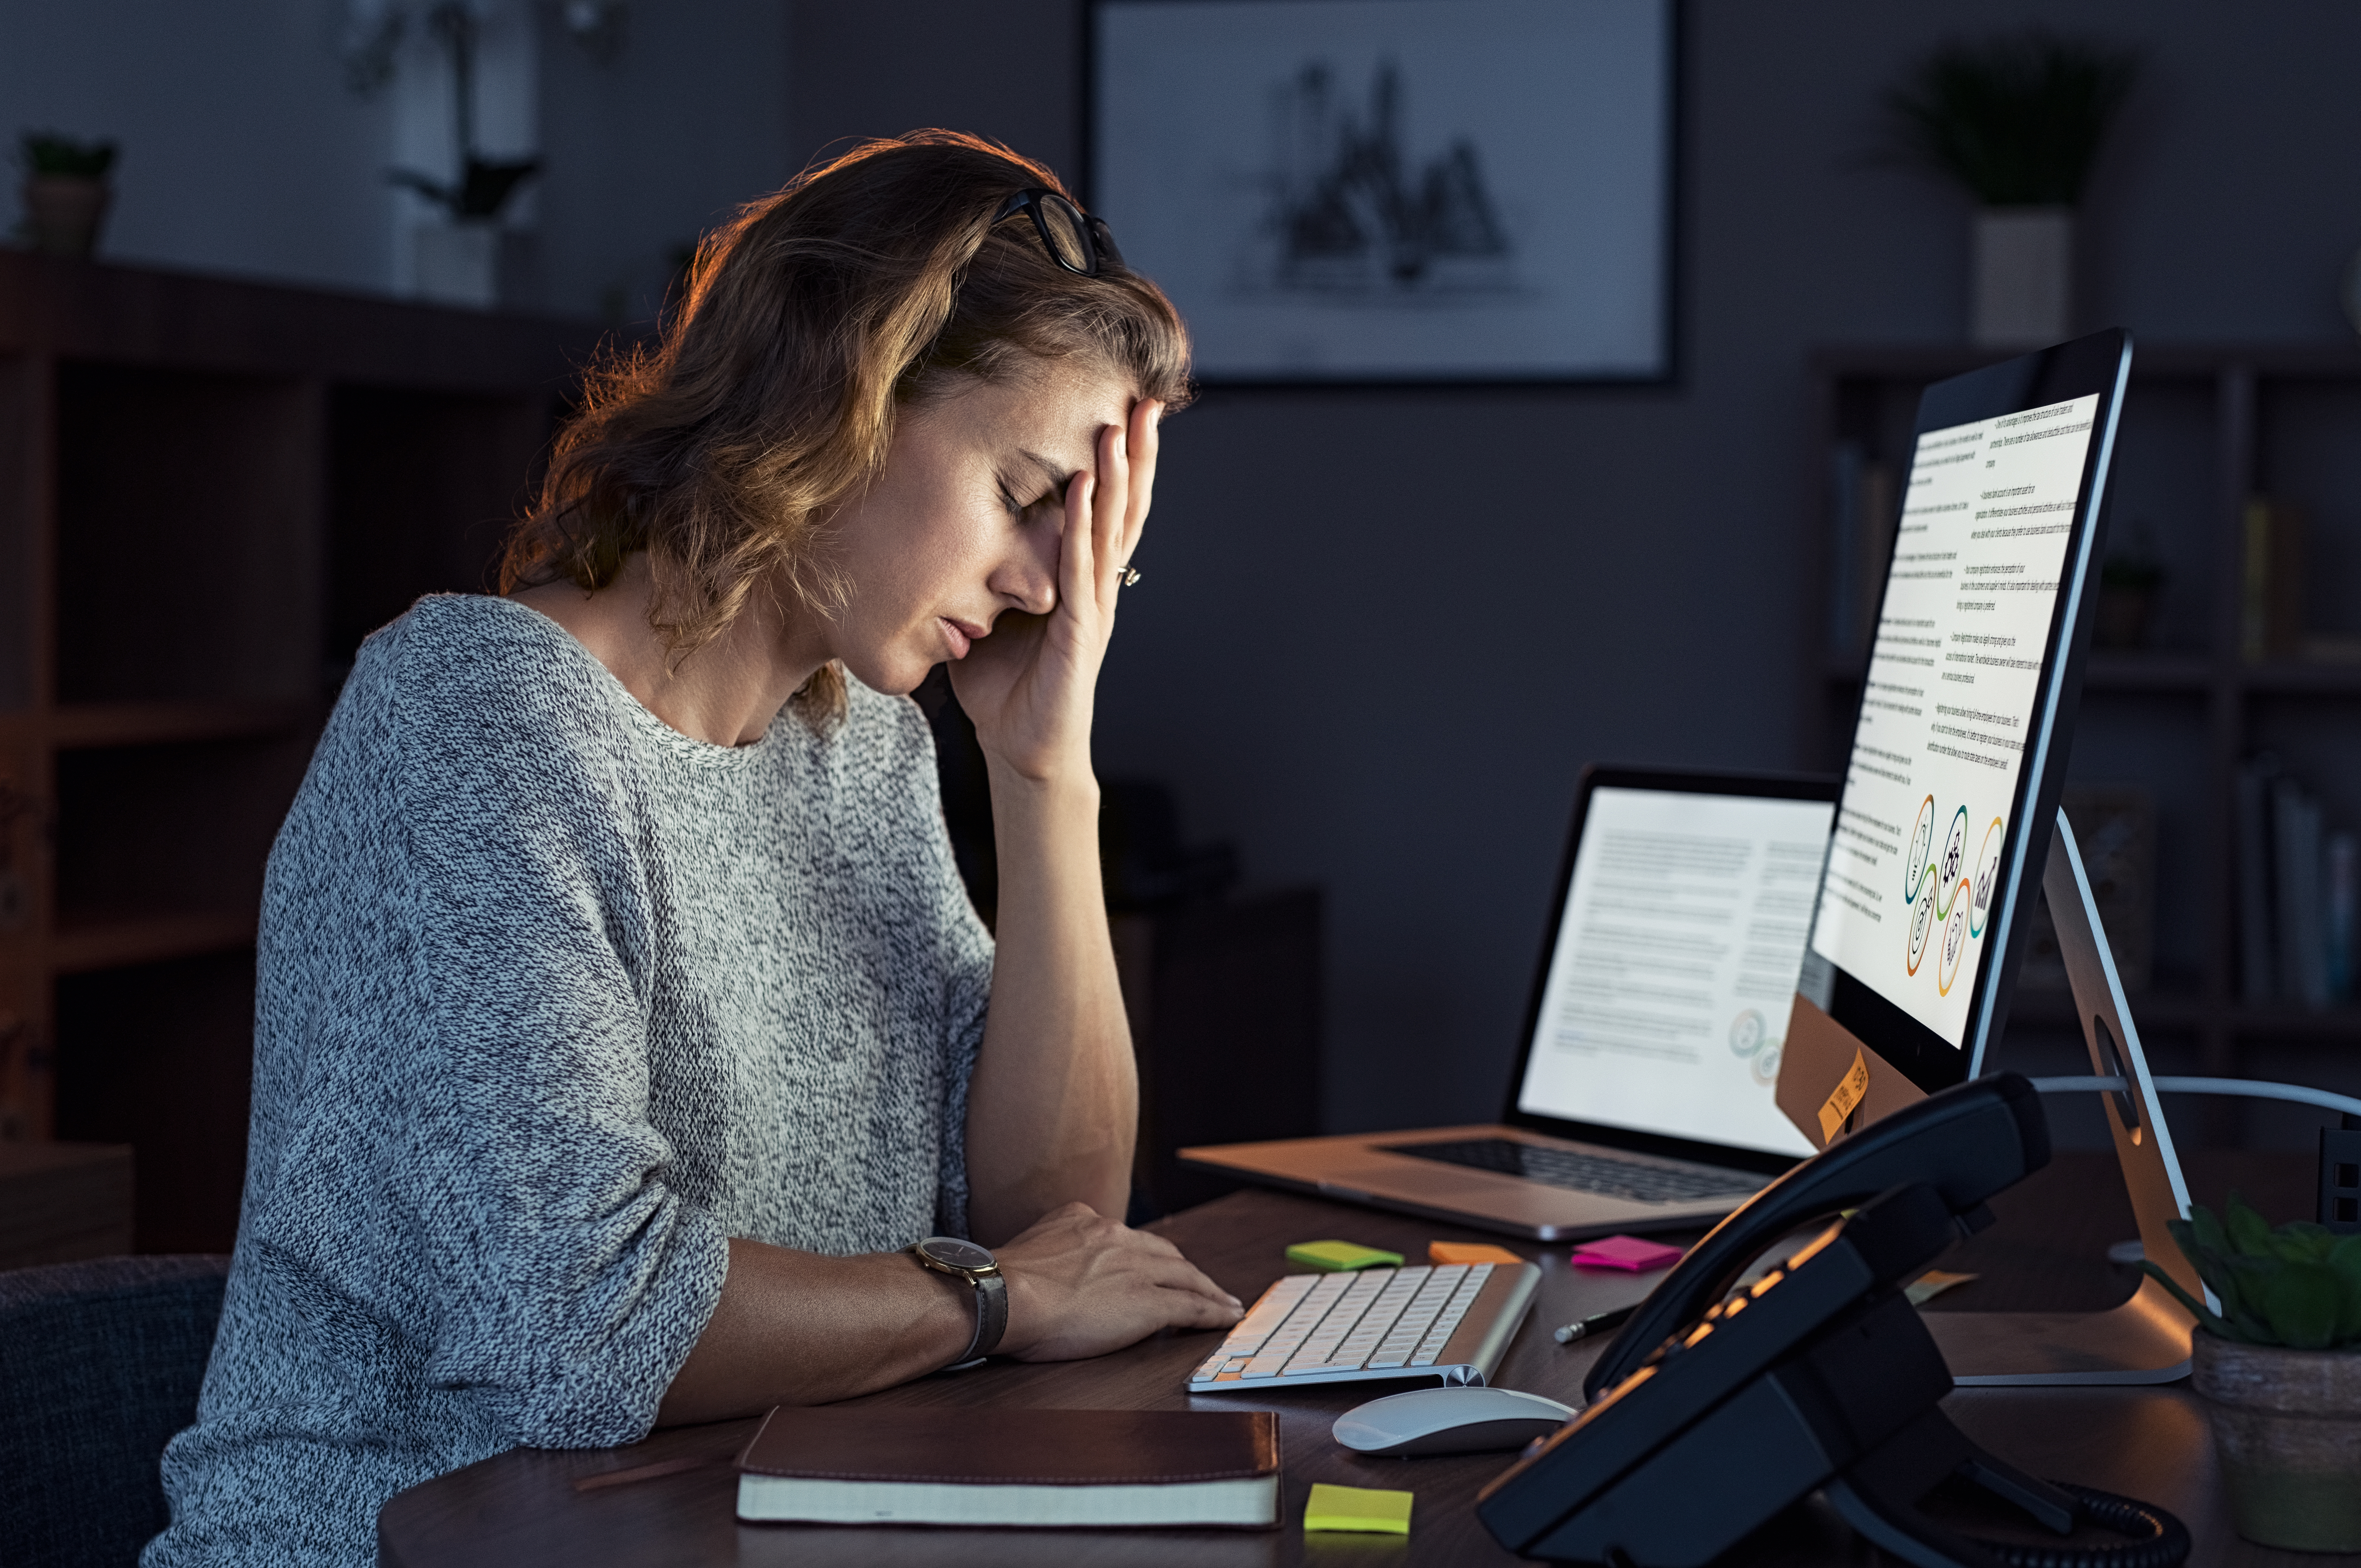 Portrait of a casual stressed lady with headache at desk. | Source: Shutterstock